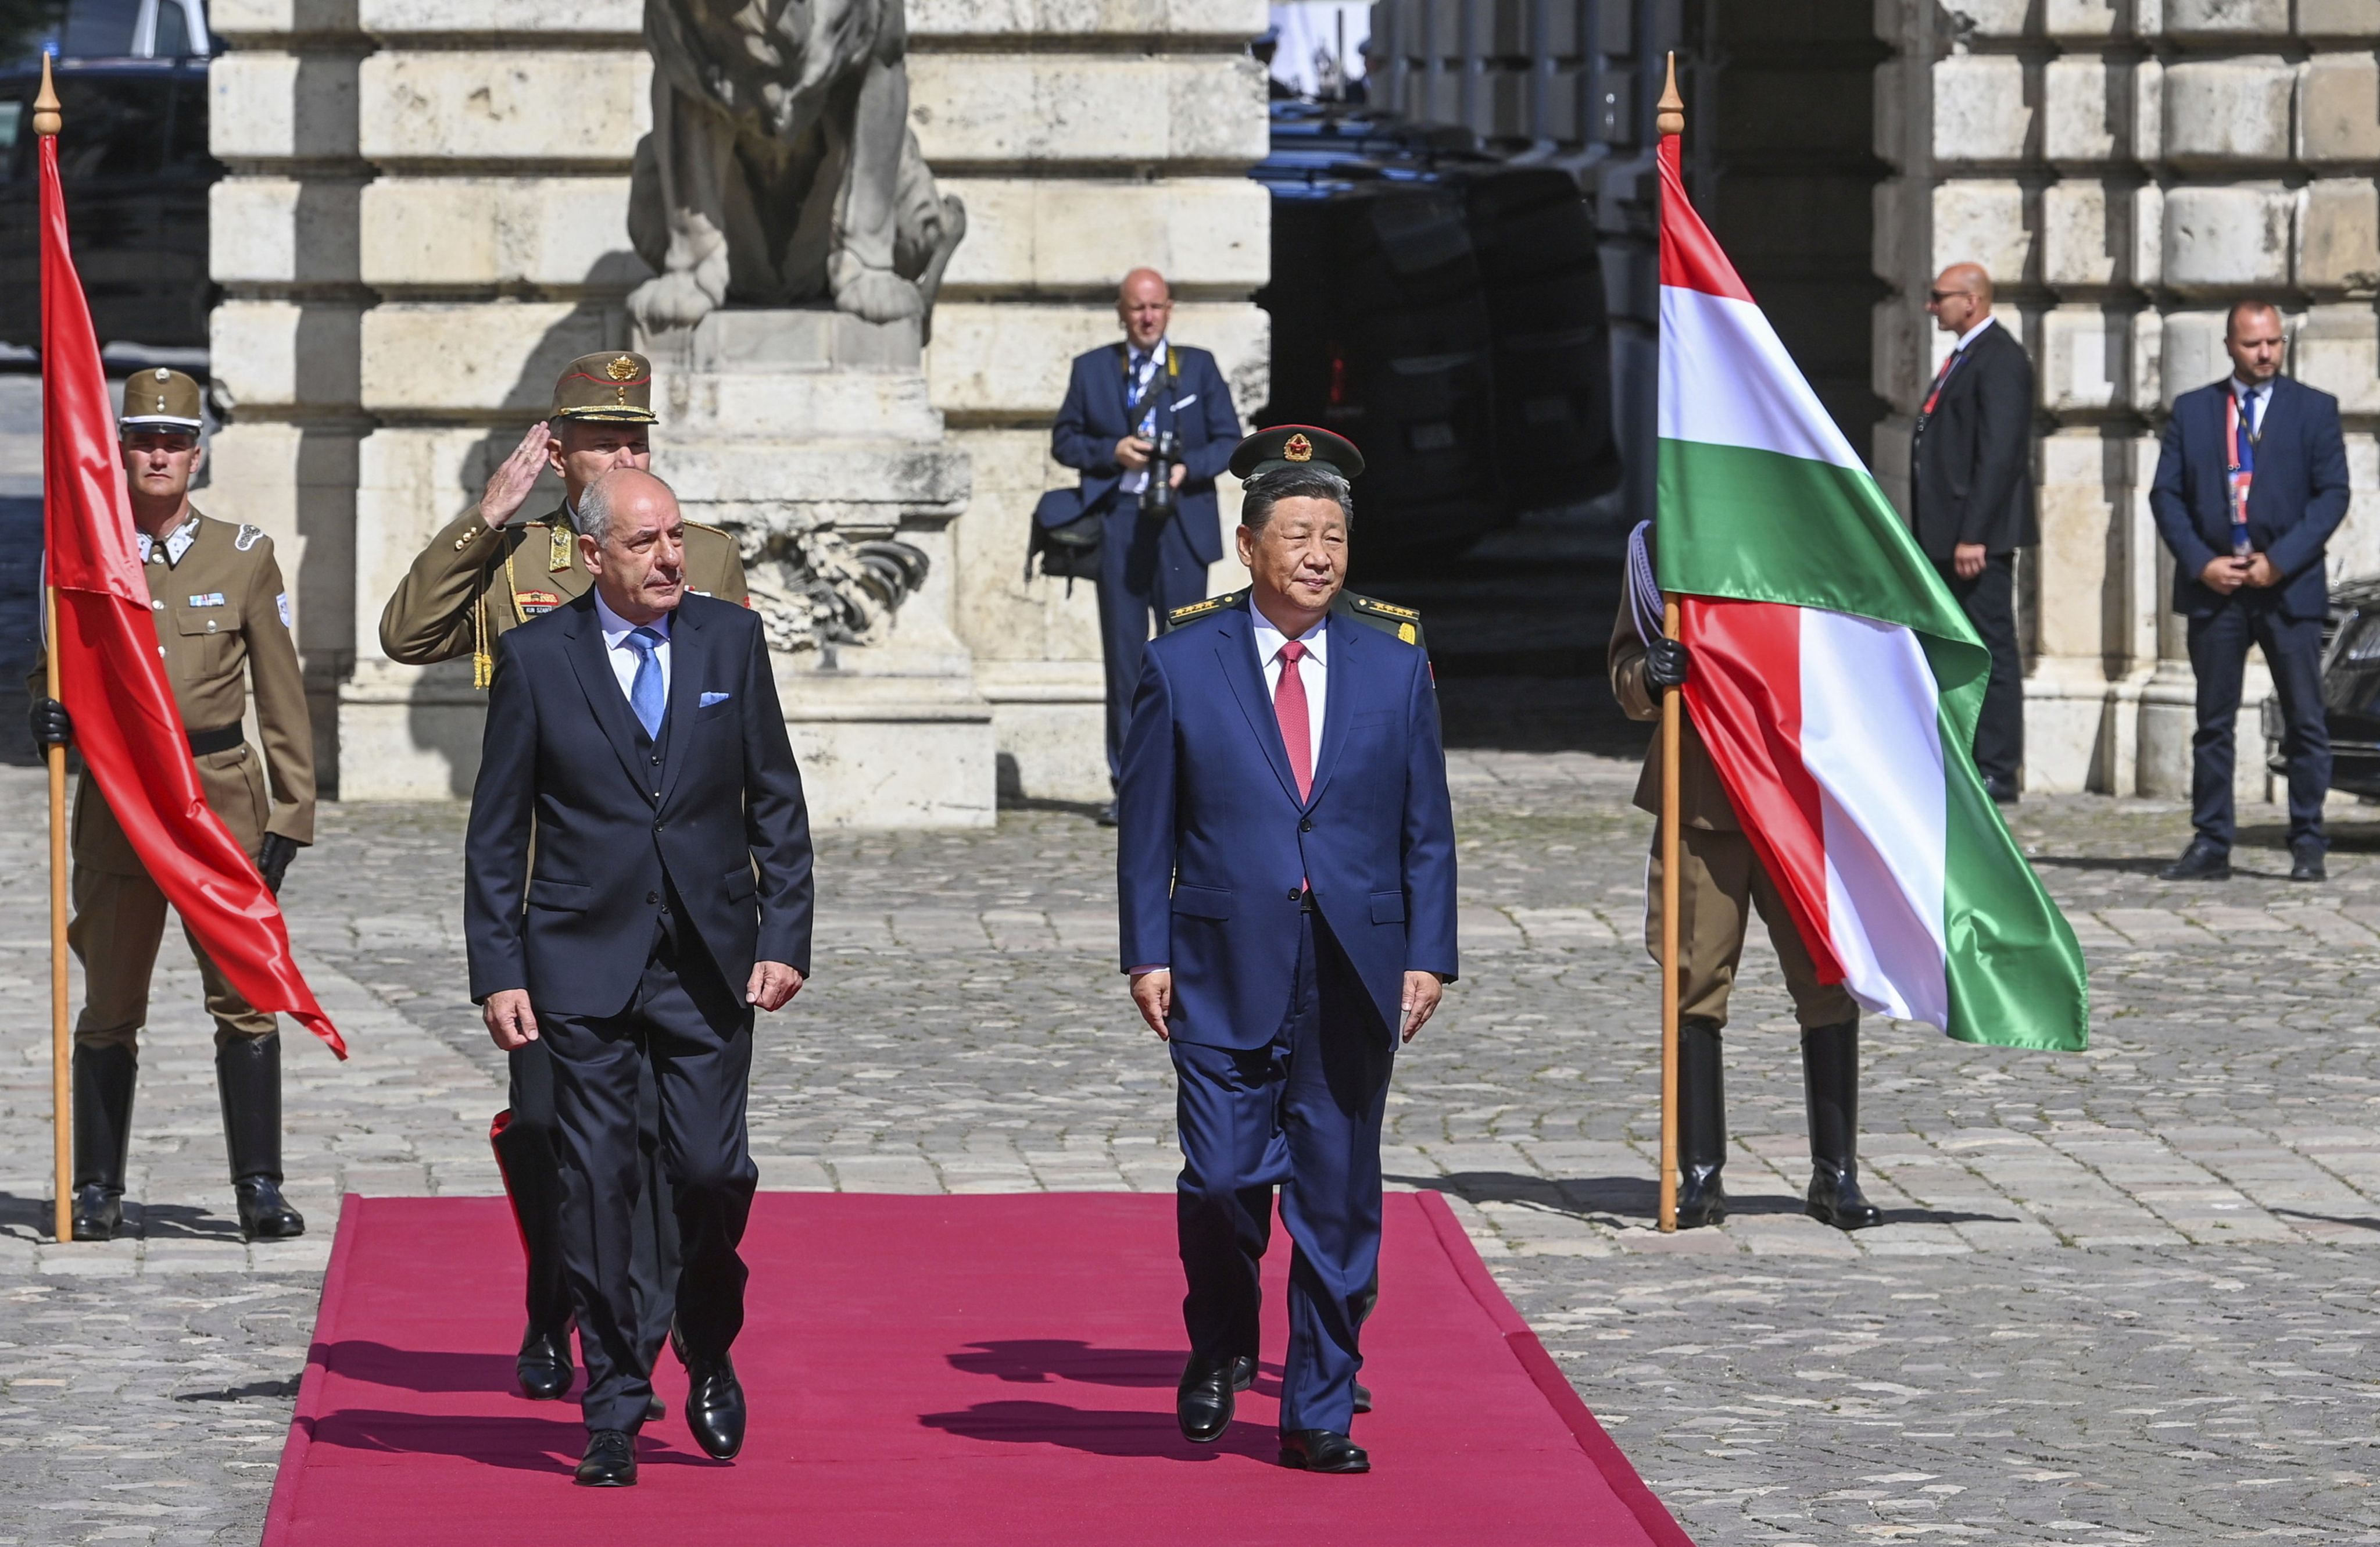 Hungarian President Tamas Sulyok (left) welcomes Chinese President Xi Jinping to Buda Castle in Budapest on Thursday. Photo: MTI via AP